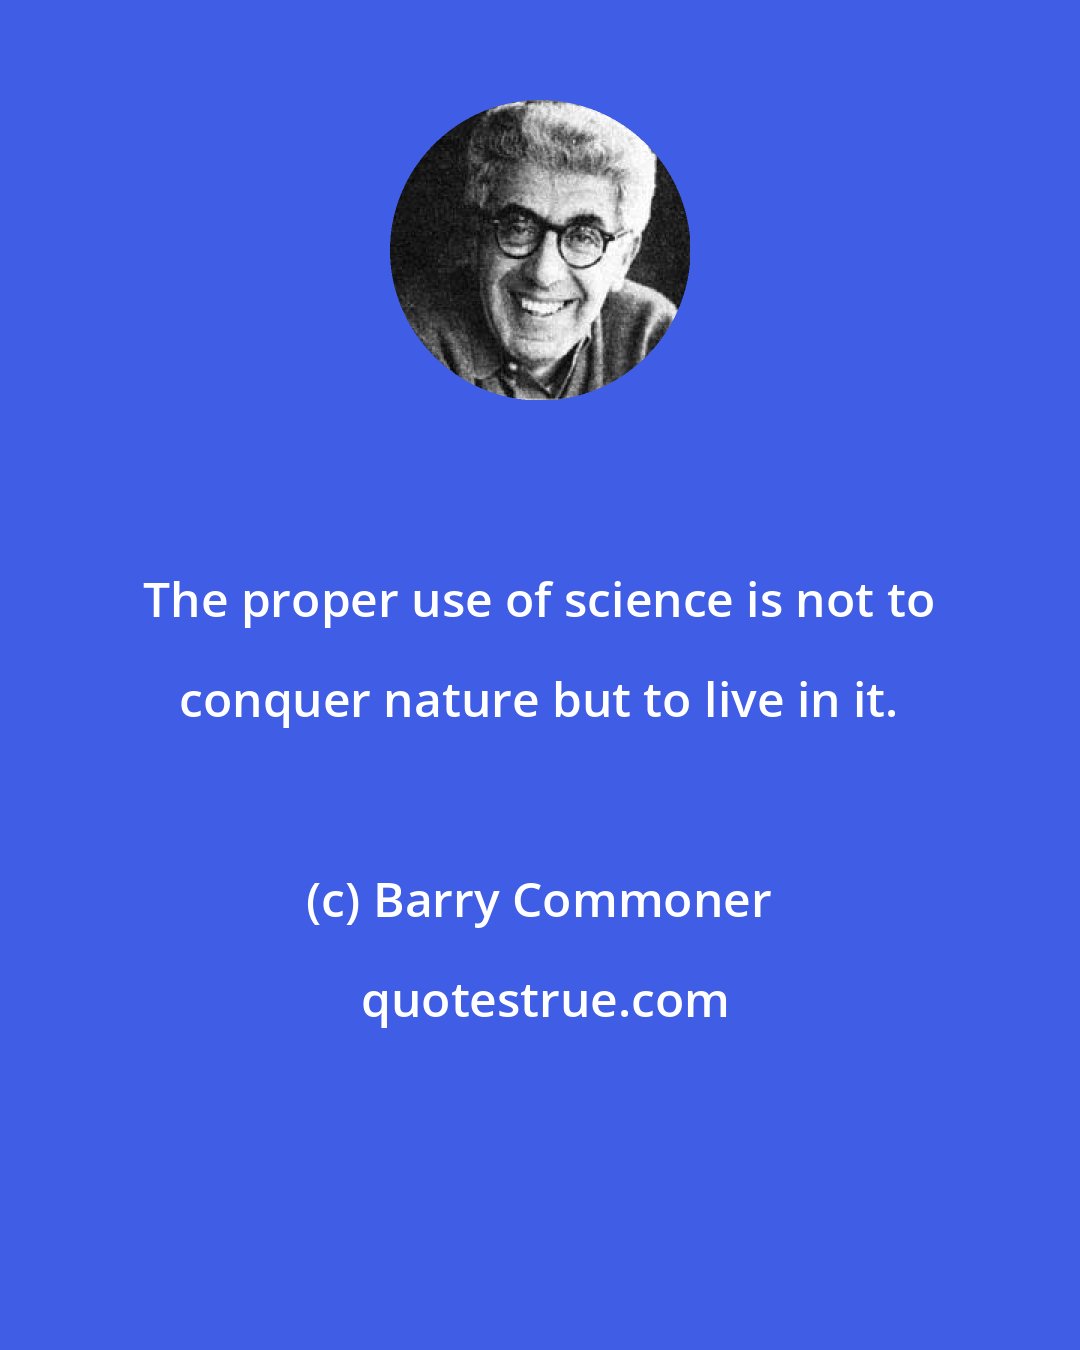 Barry Commoner: The proper use of science is not to conquer nature but to live in it.